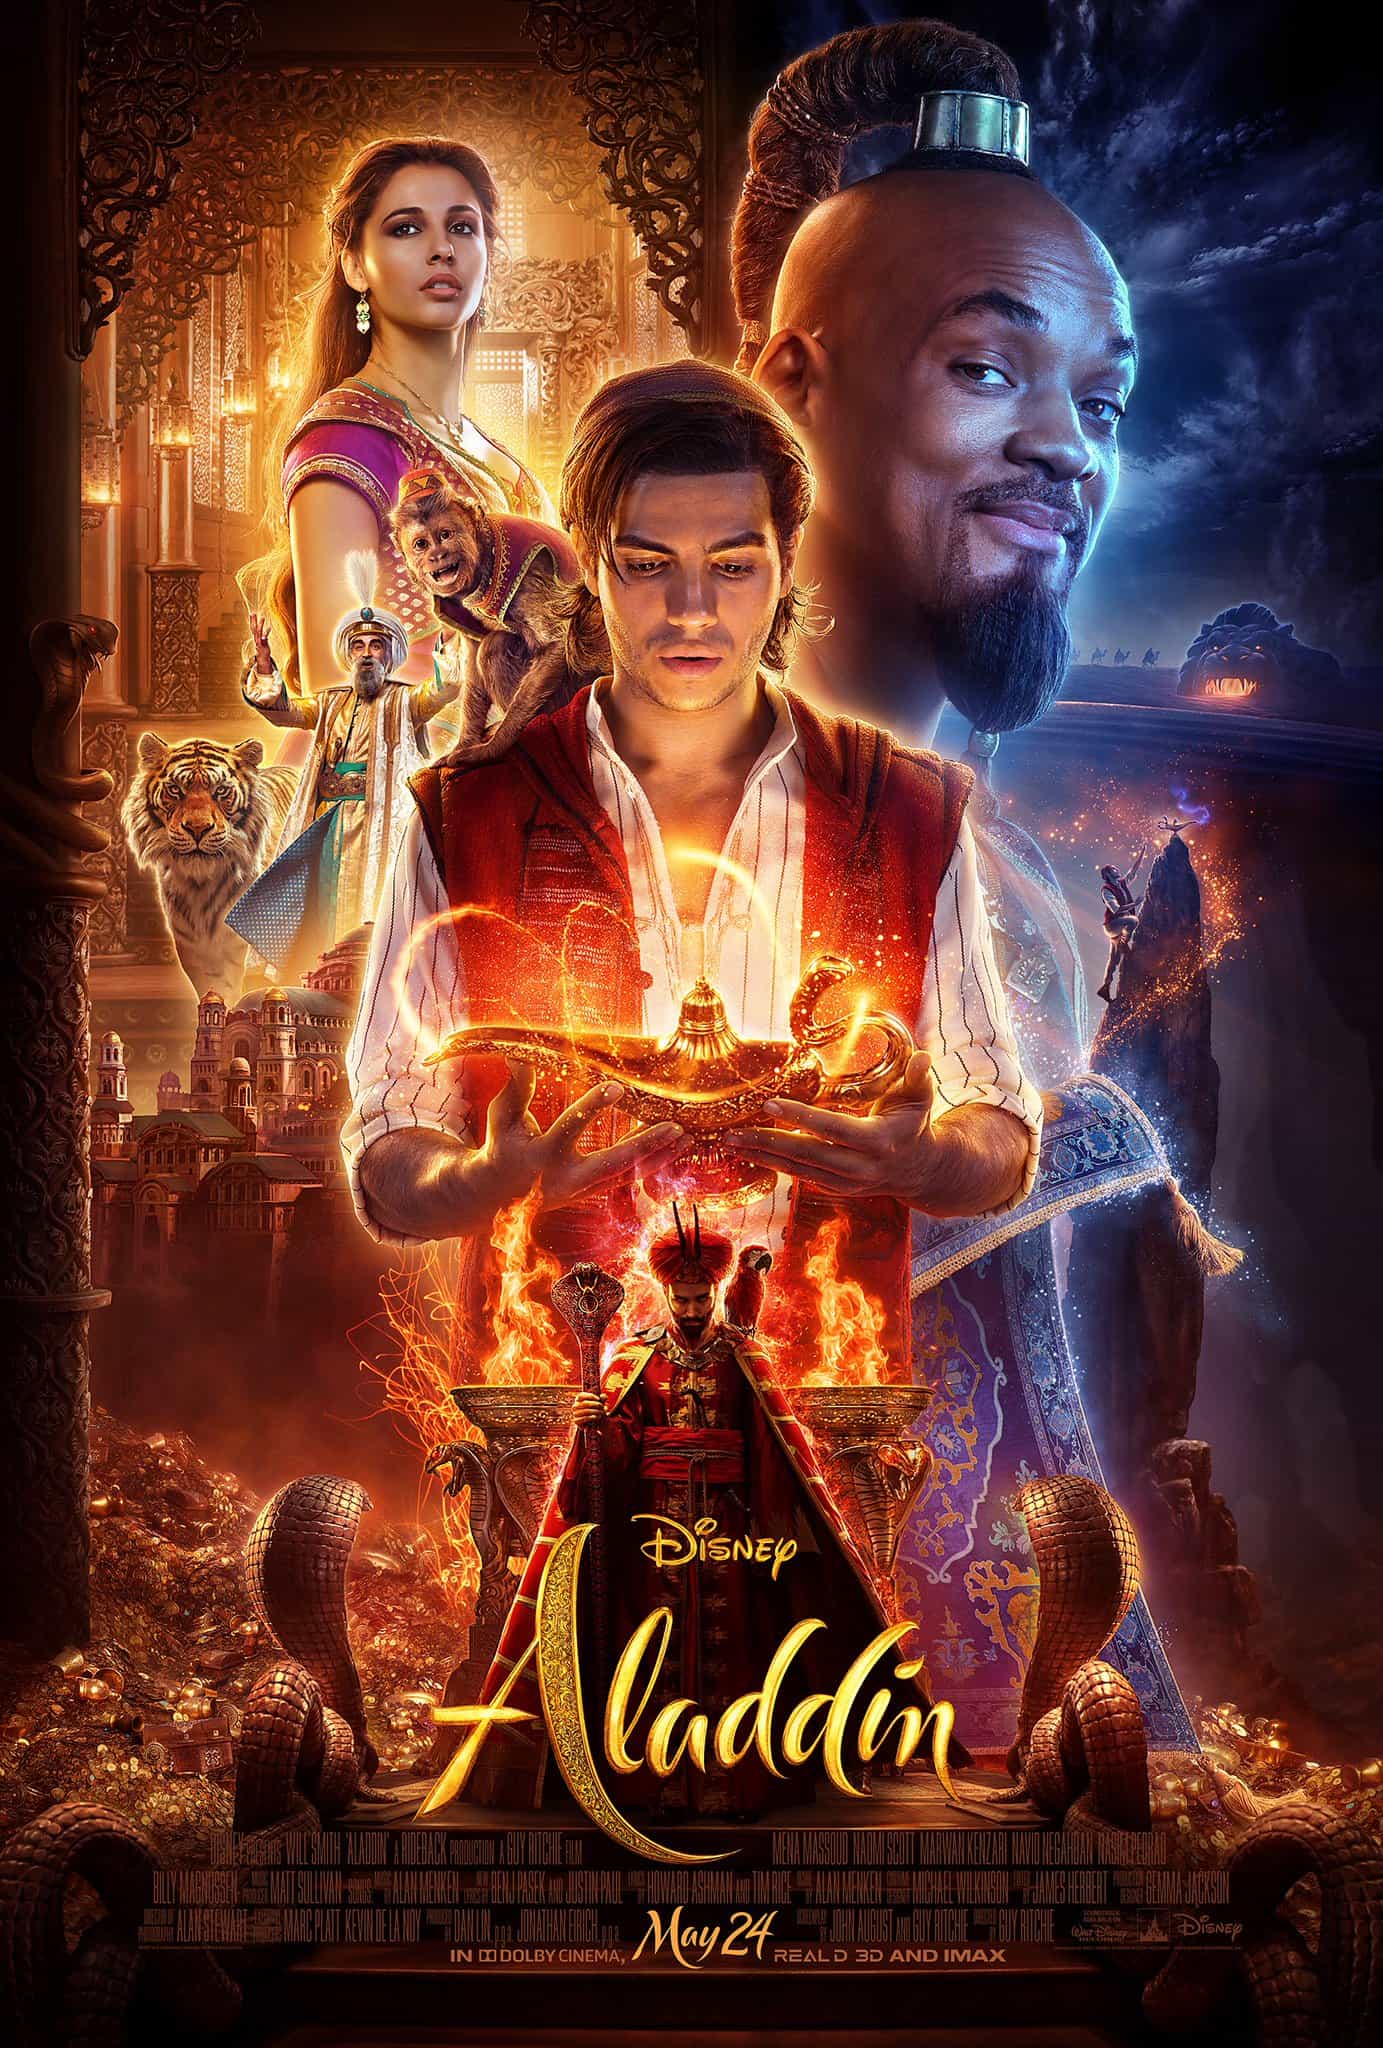 New film releases at the UK box office Friday, 24th May 2019 -  Aladdin, Rocketman and The Secret Life Of Pets 2